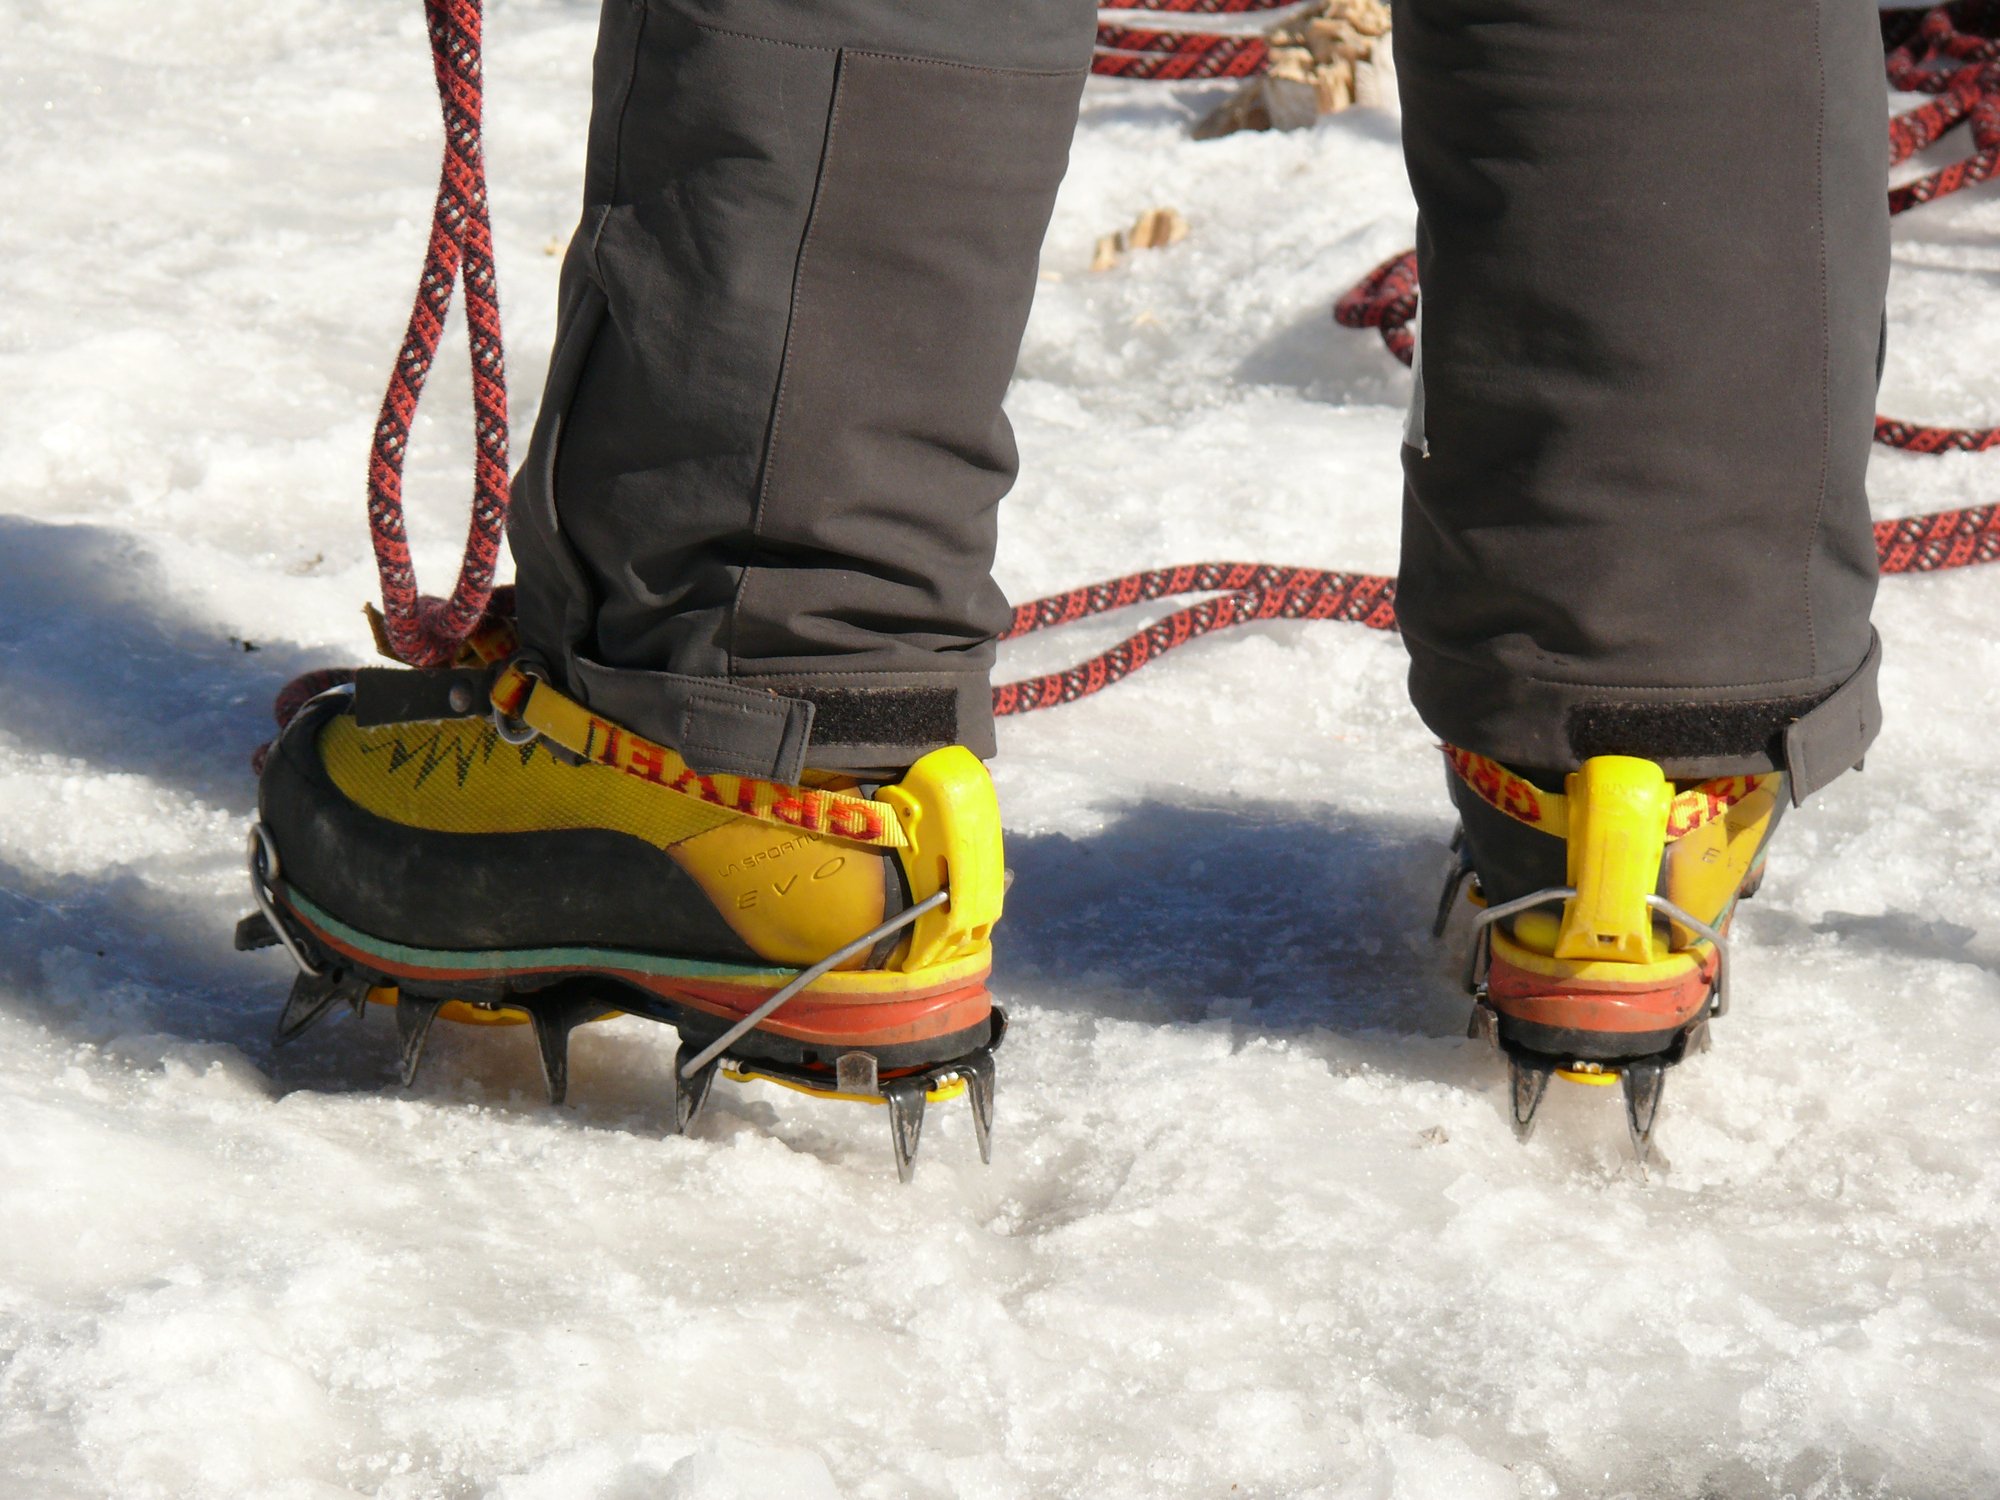 Crampon Essentials: A Guide to C1, C2 and C3 Compatibility